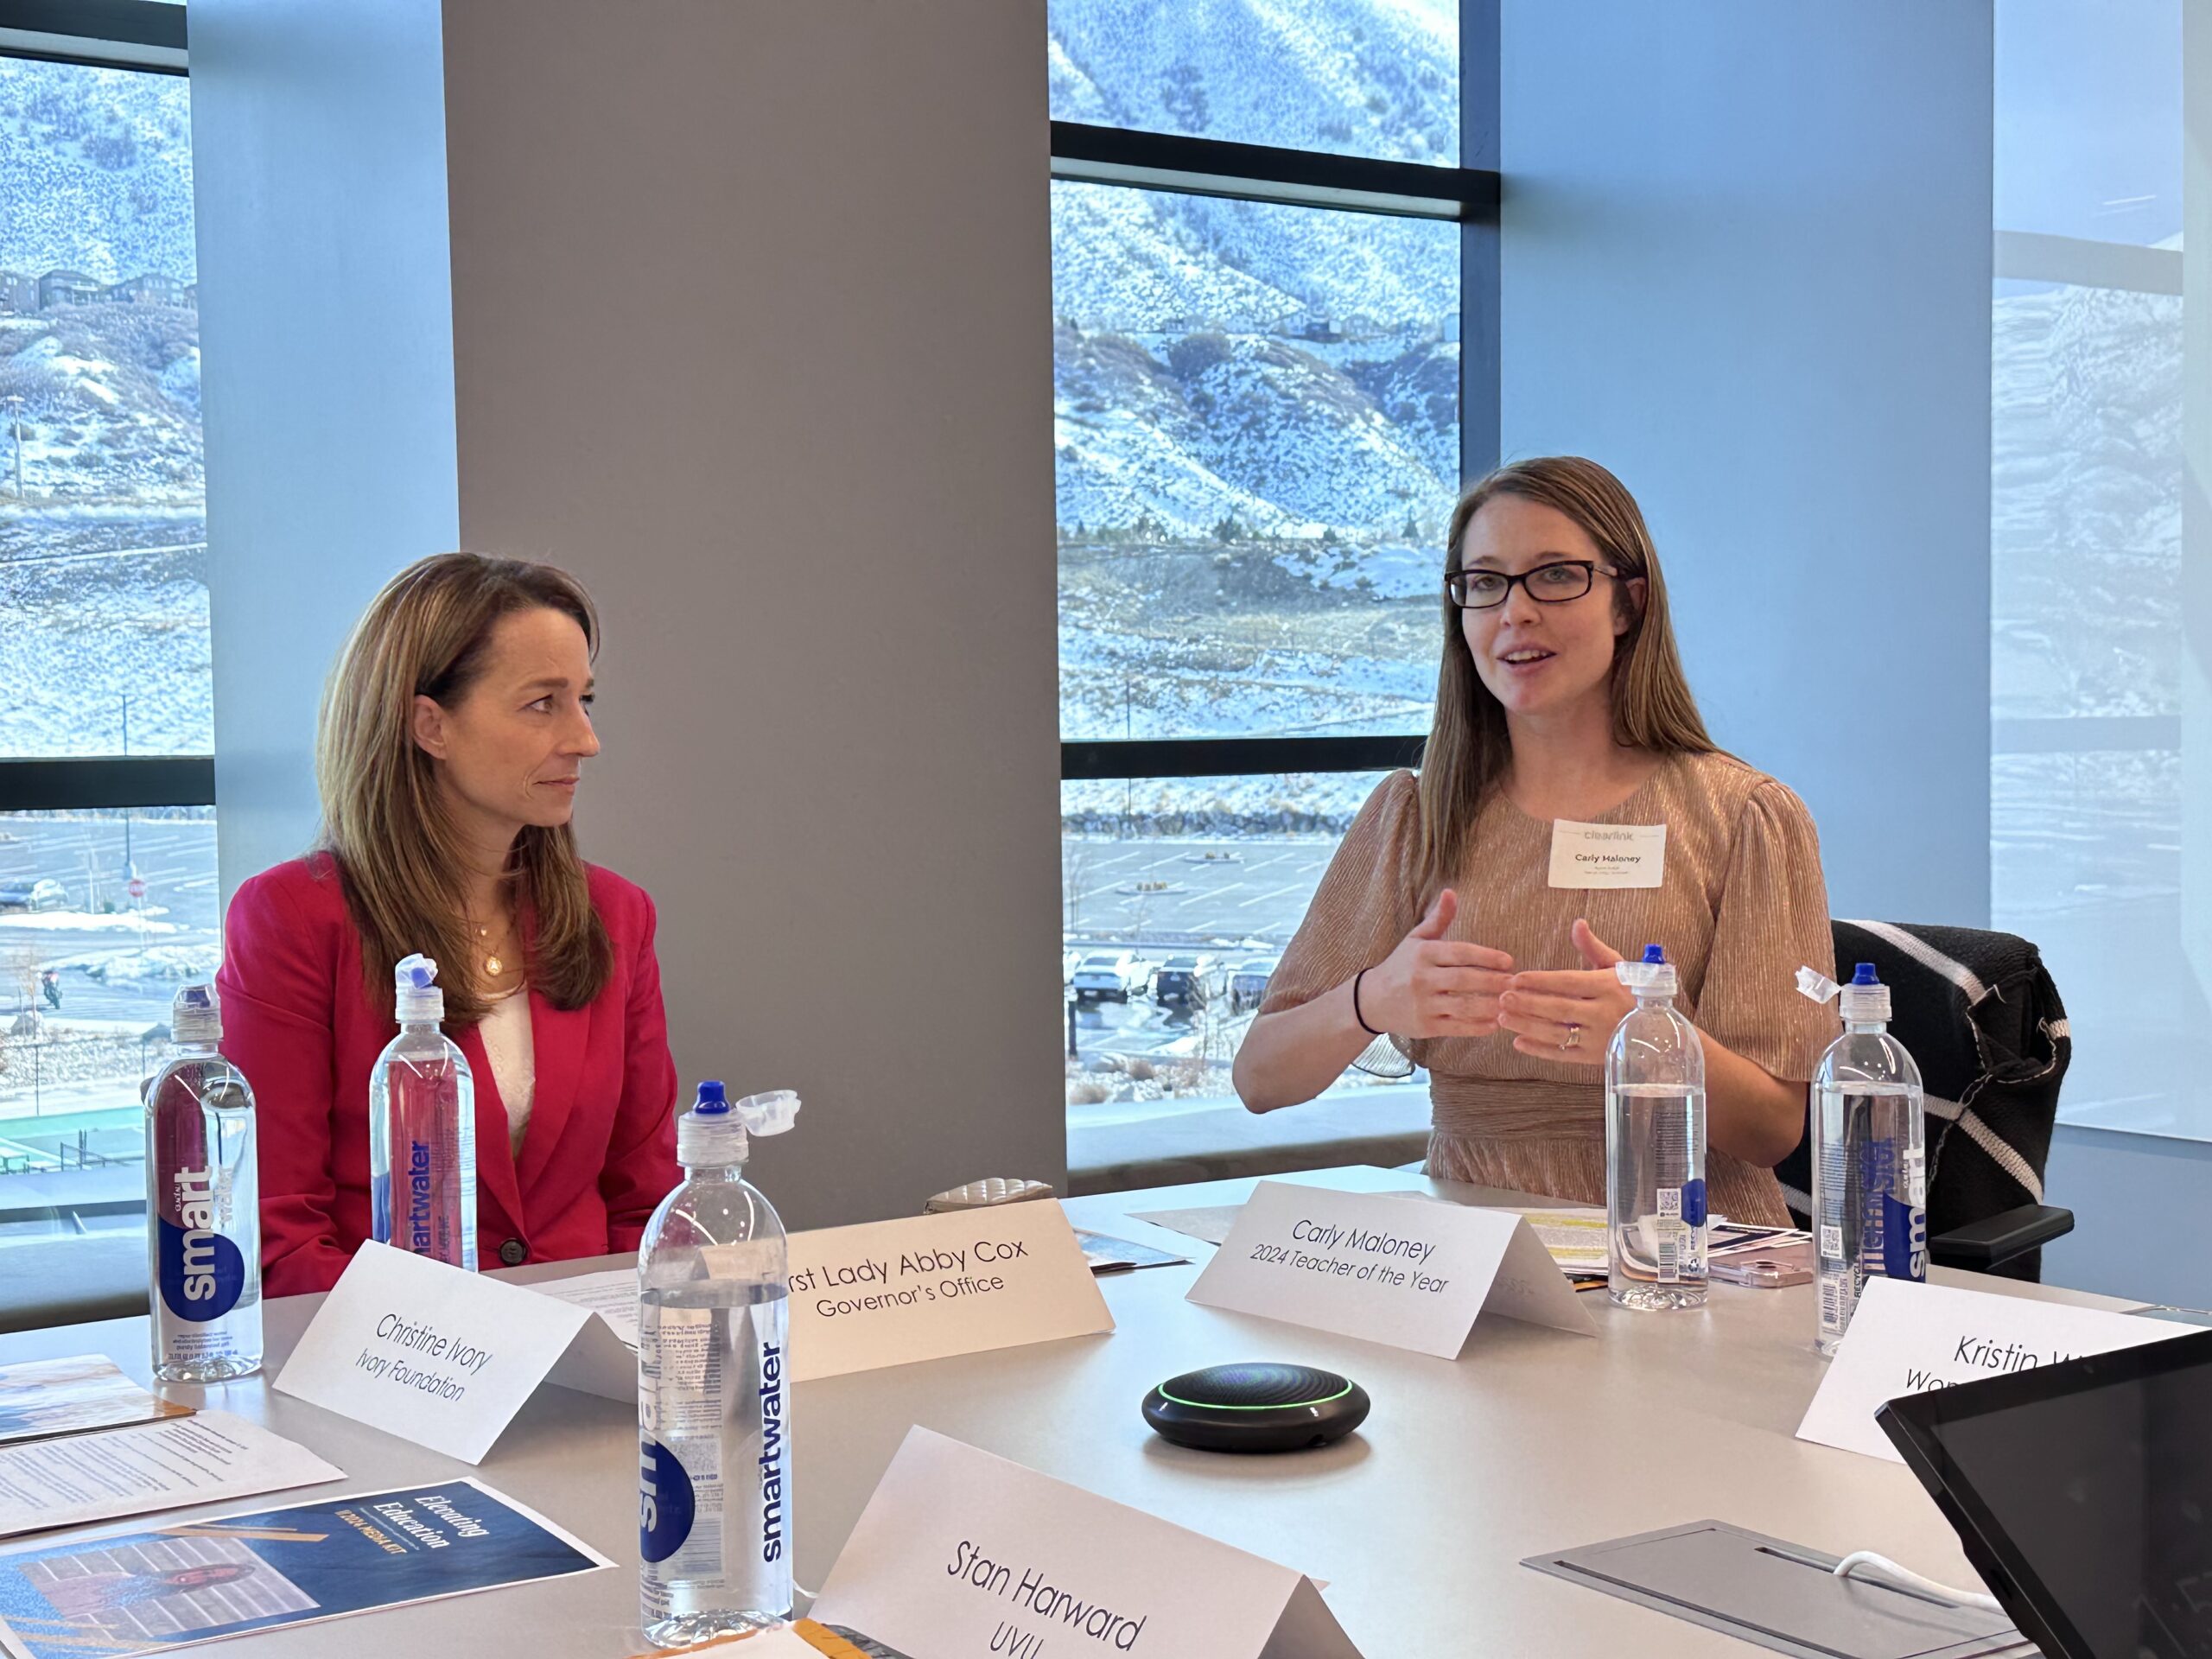 Last month, Utah Business partnered with Clearlink to host a roundtable on education in Utah.